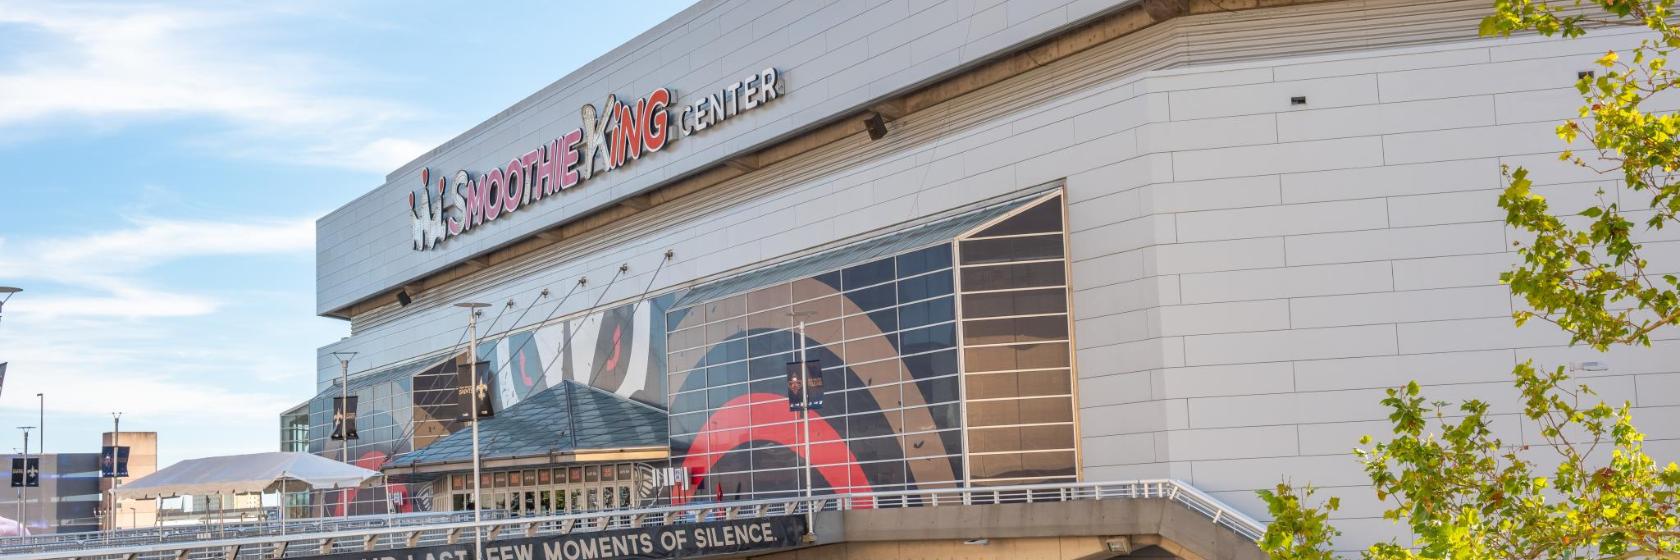 Smoothie King Center – New Orleans Pelicans